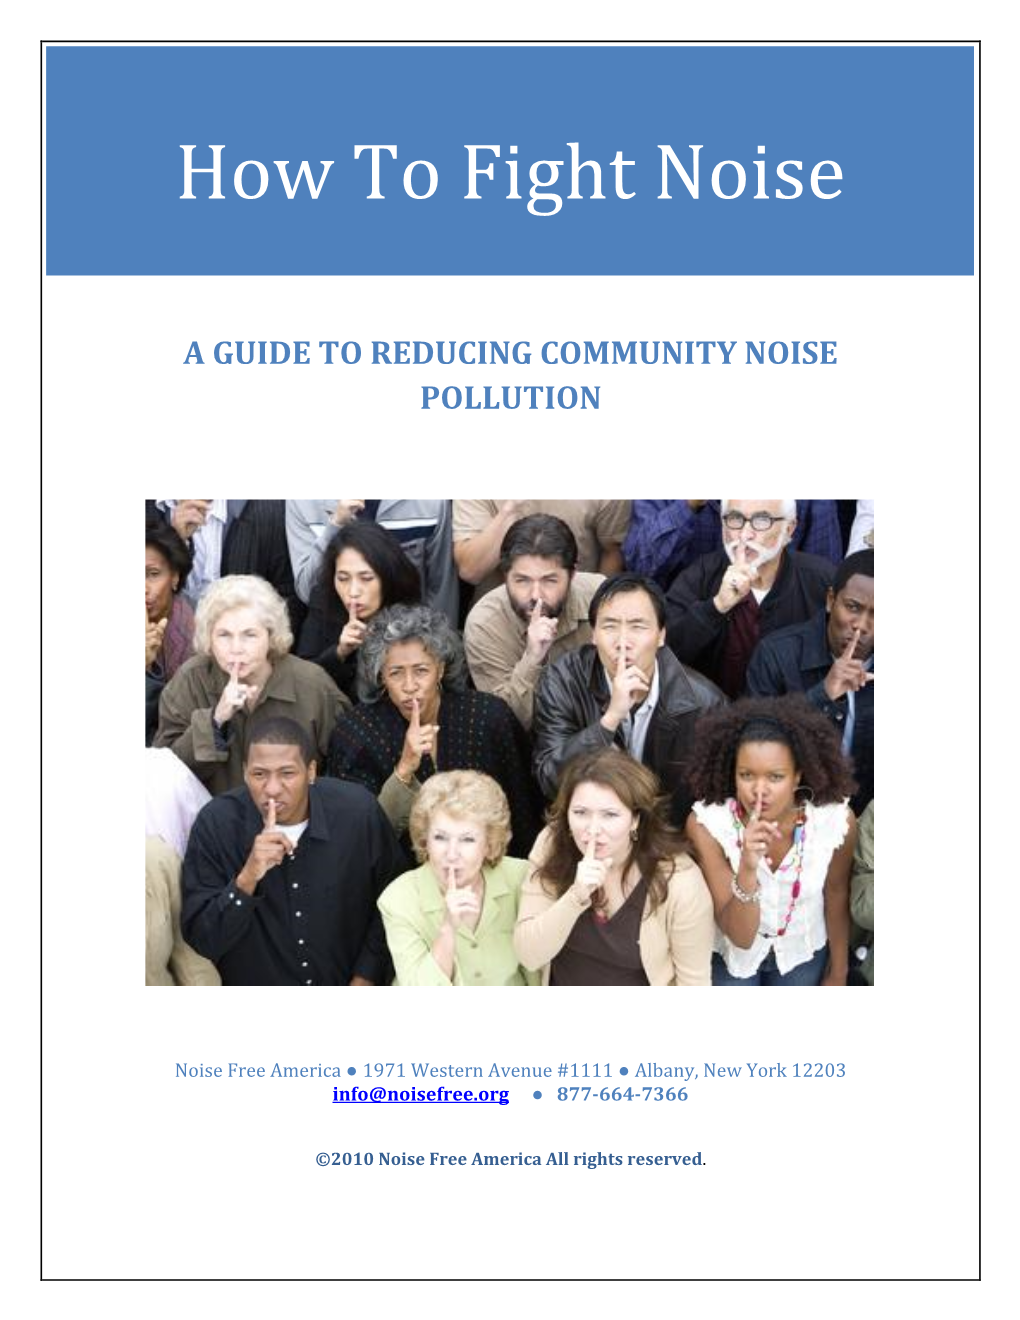 How to Fight Noise